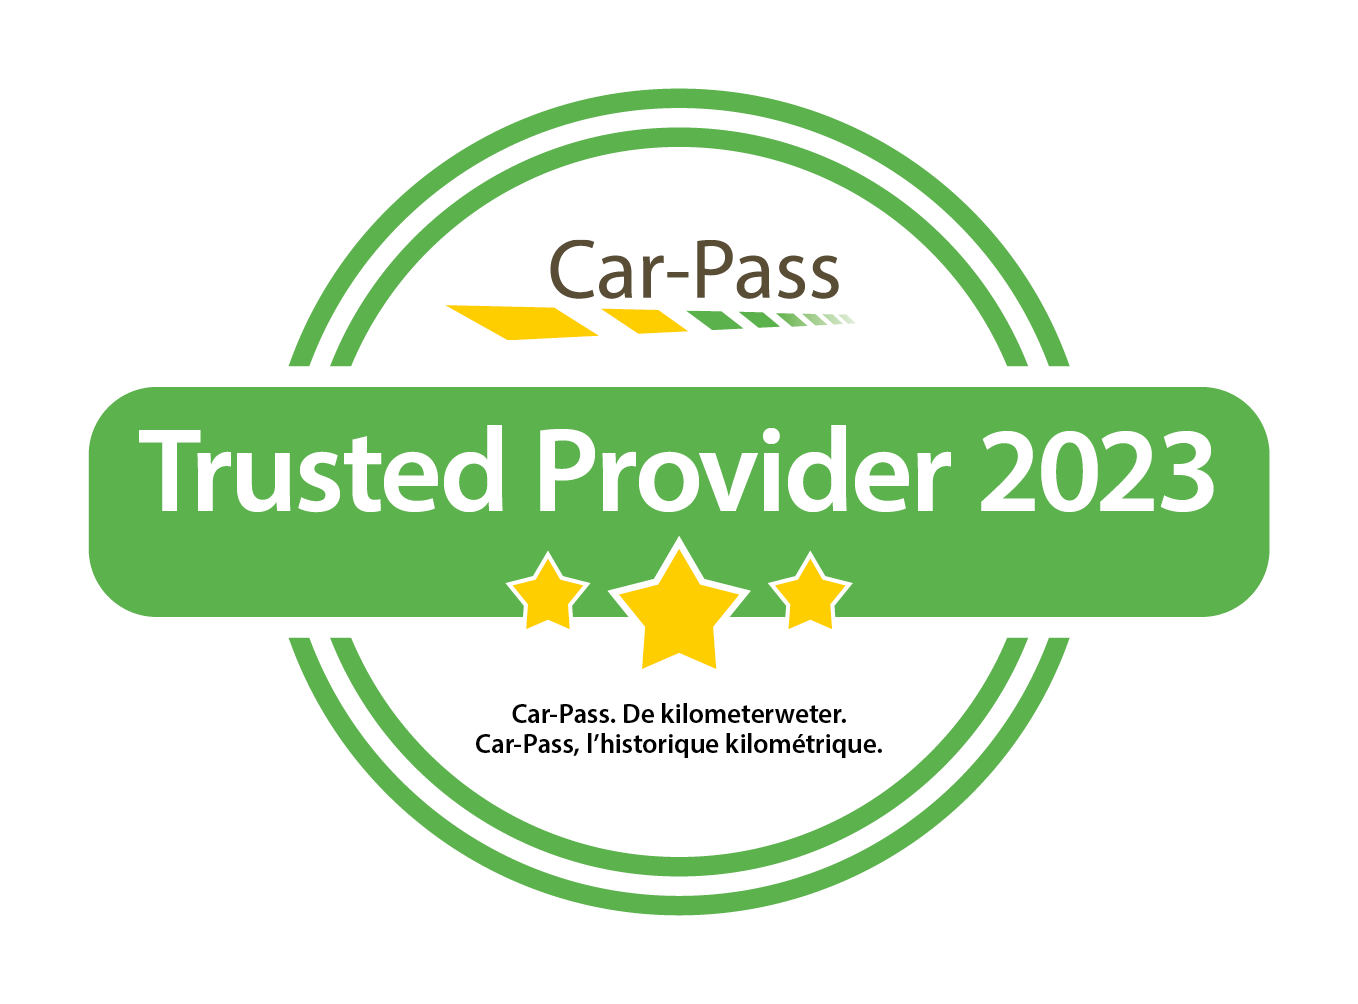 Car pass Trusted provider 2022